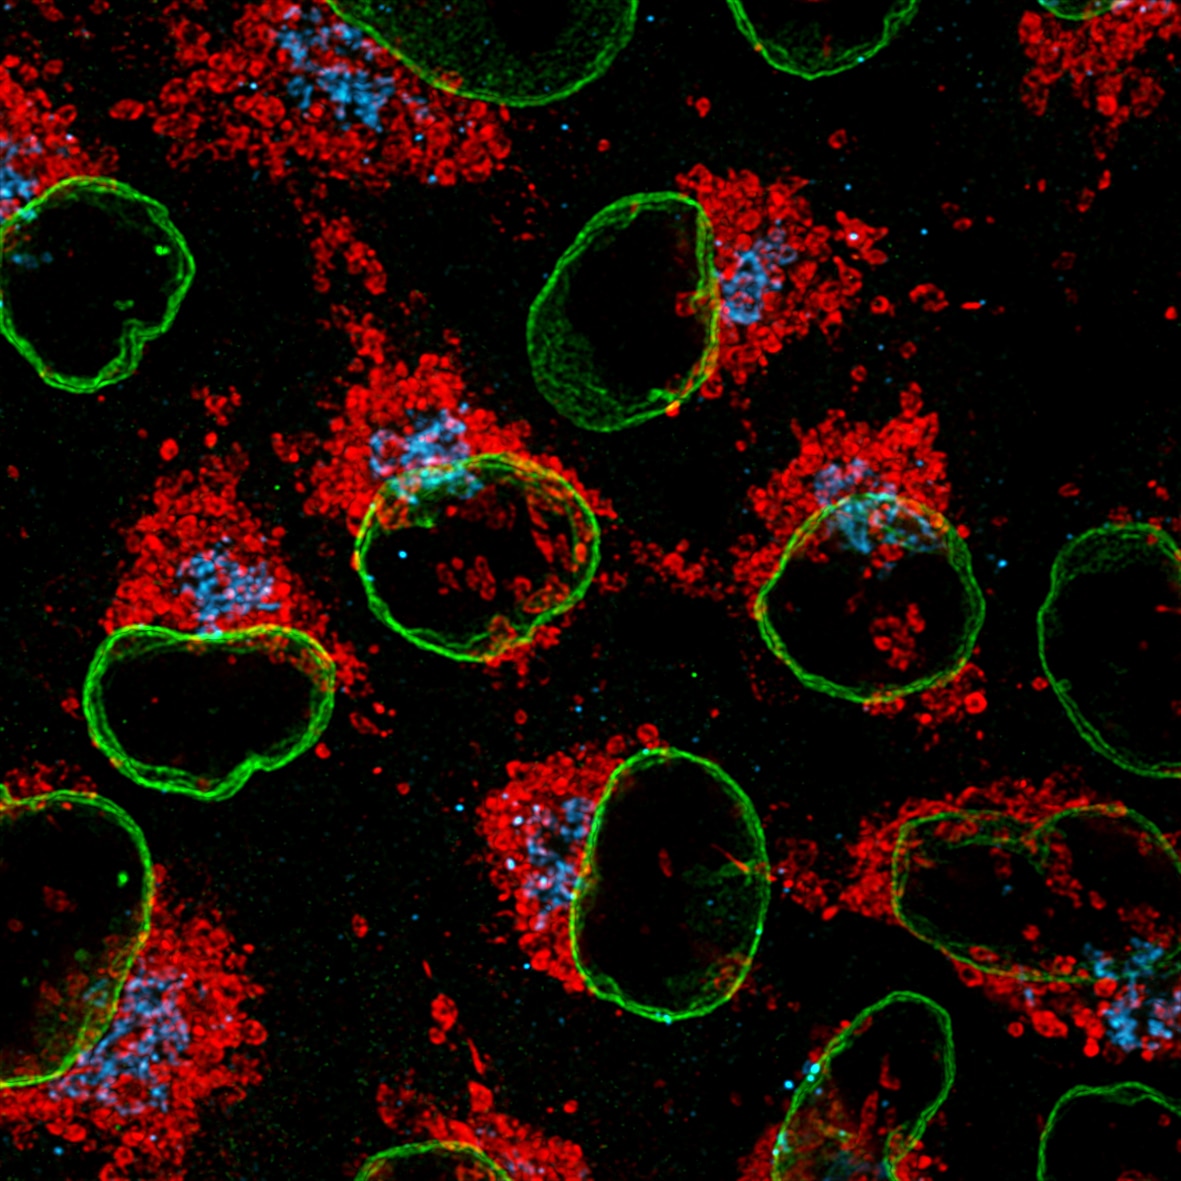 Immunofluorescence of HeLa: PFA-fixed HeLa cells were stained with anti-Lamin B1 antibody (66095-1-Ig) labeled with FlexAble CoraLite® 488 Kit (KFA021, green), anti-HSP60 (66041-1-Ig) labeled with FlexAble CoraLite Plus 550 Kit (KFA022, red) and
                                                                     anti-GORASP2 antibody (66627-1-Ig) labeled with FlexAble CoraLite Plus 650 Kit (KFA023, cyan). Confocal images were acquired with a 100x oil objective and post-processed. Images were recorded at the Core Facility Bioimaging at the Biomedical Center, LMU Munich.